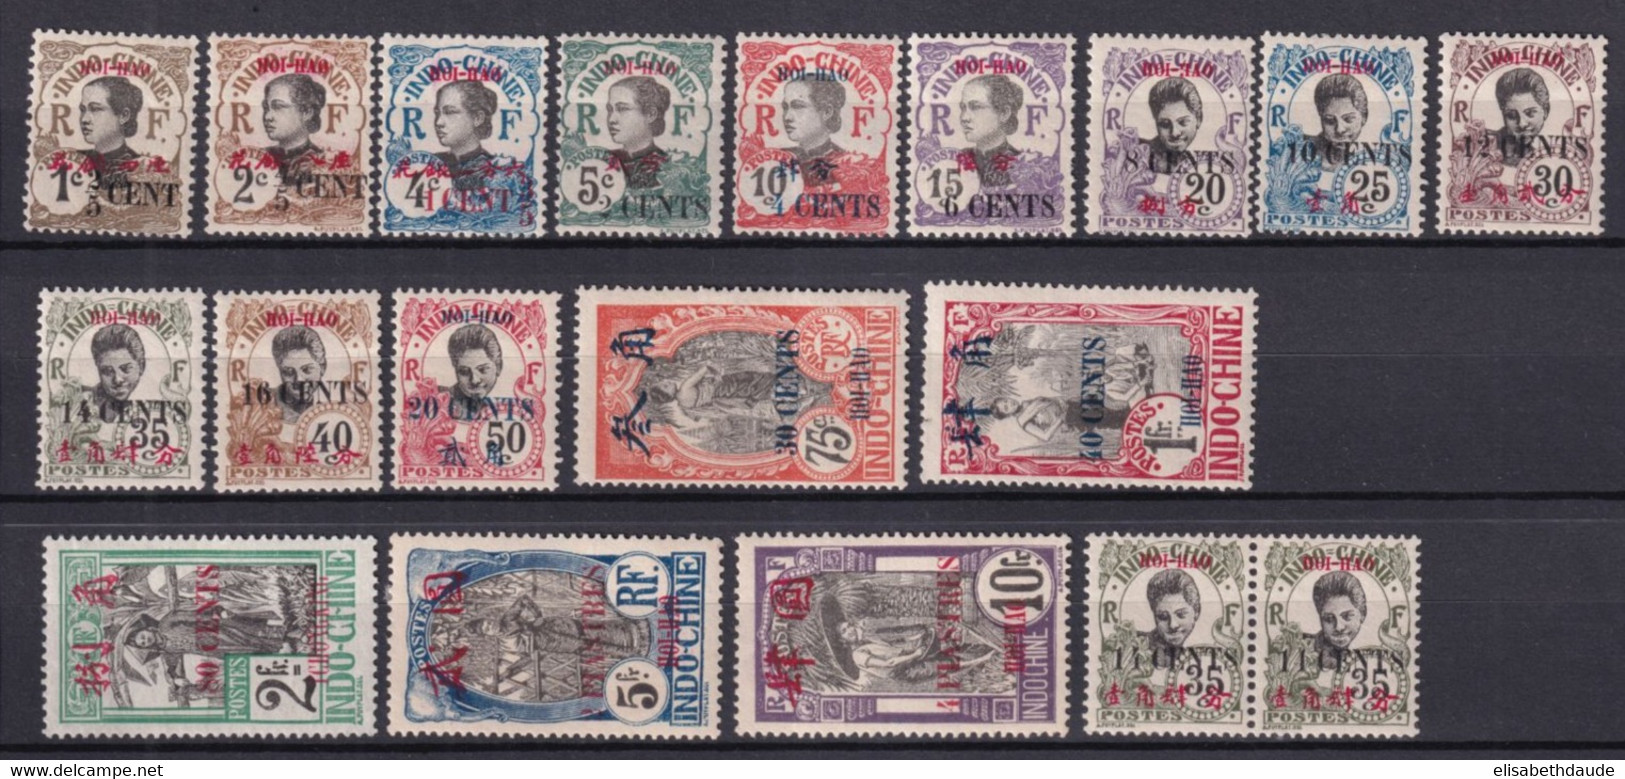 HOI-HAO (CHINE) - SERIE COMPLETE YVERT N°66/82 + PAIRE 75aa * MLH - COTE YVERT = 503 EUR - 10F SIGNE BRUN ! - Nuovi